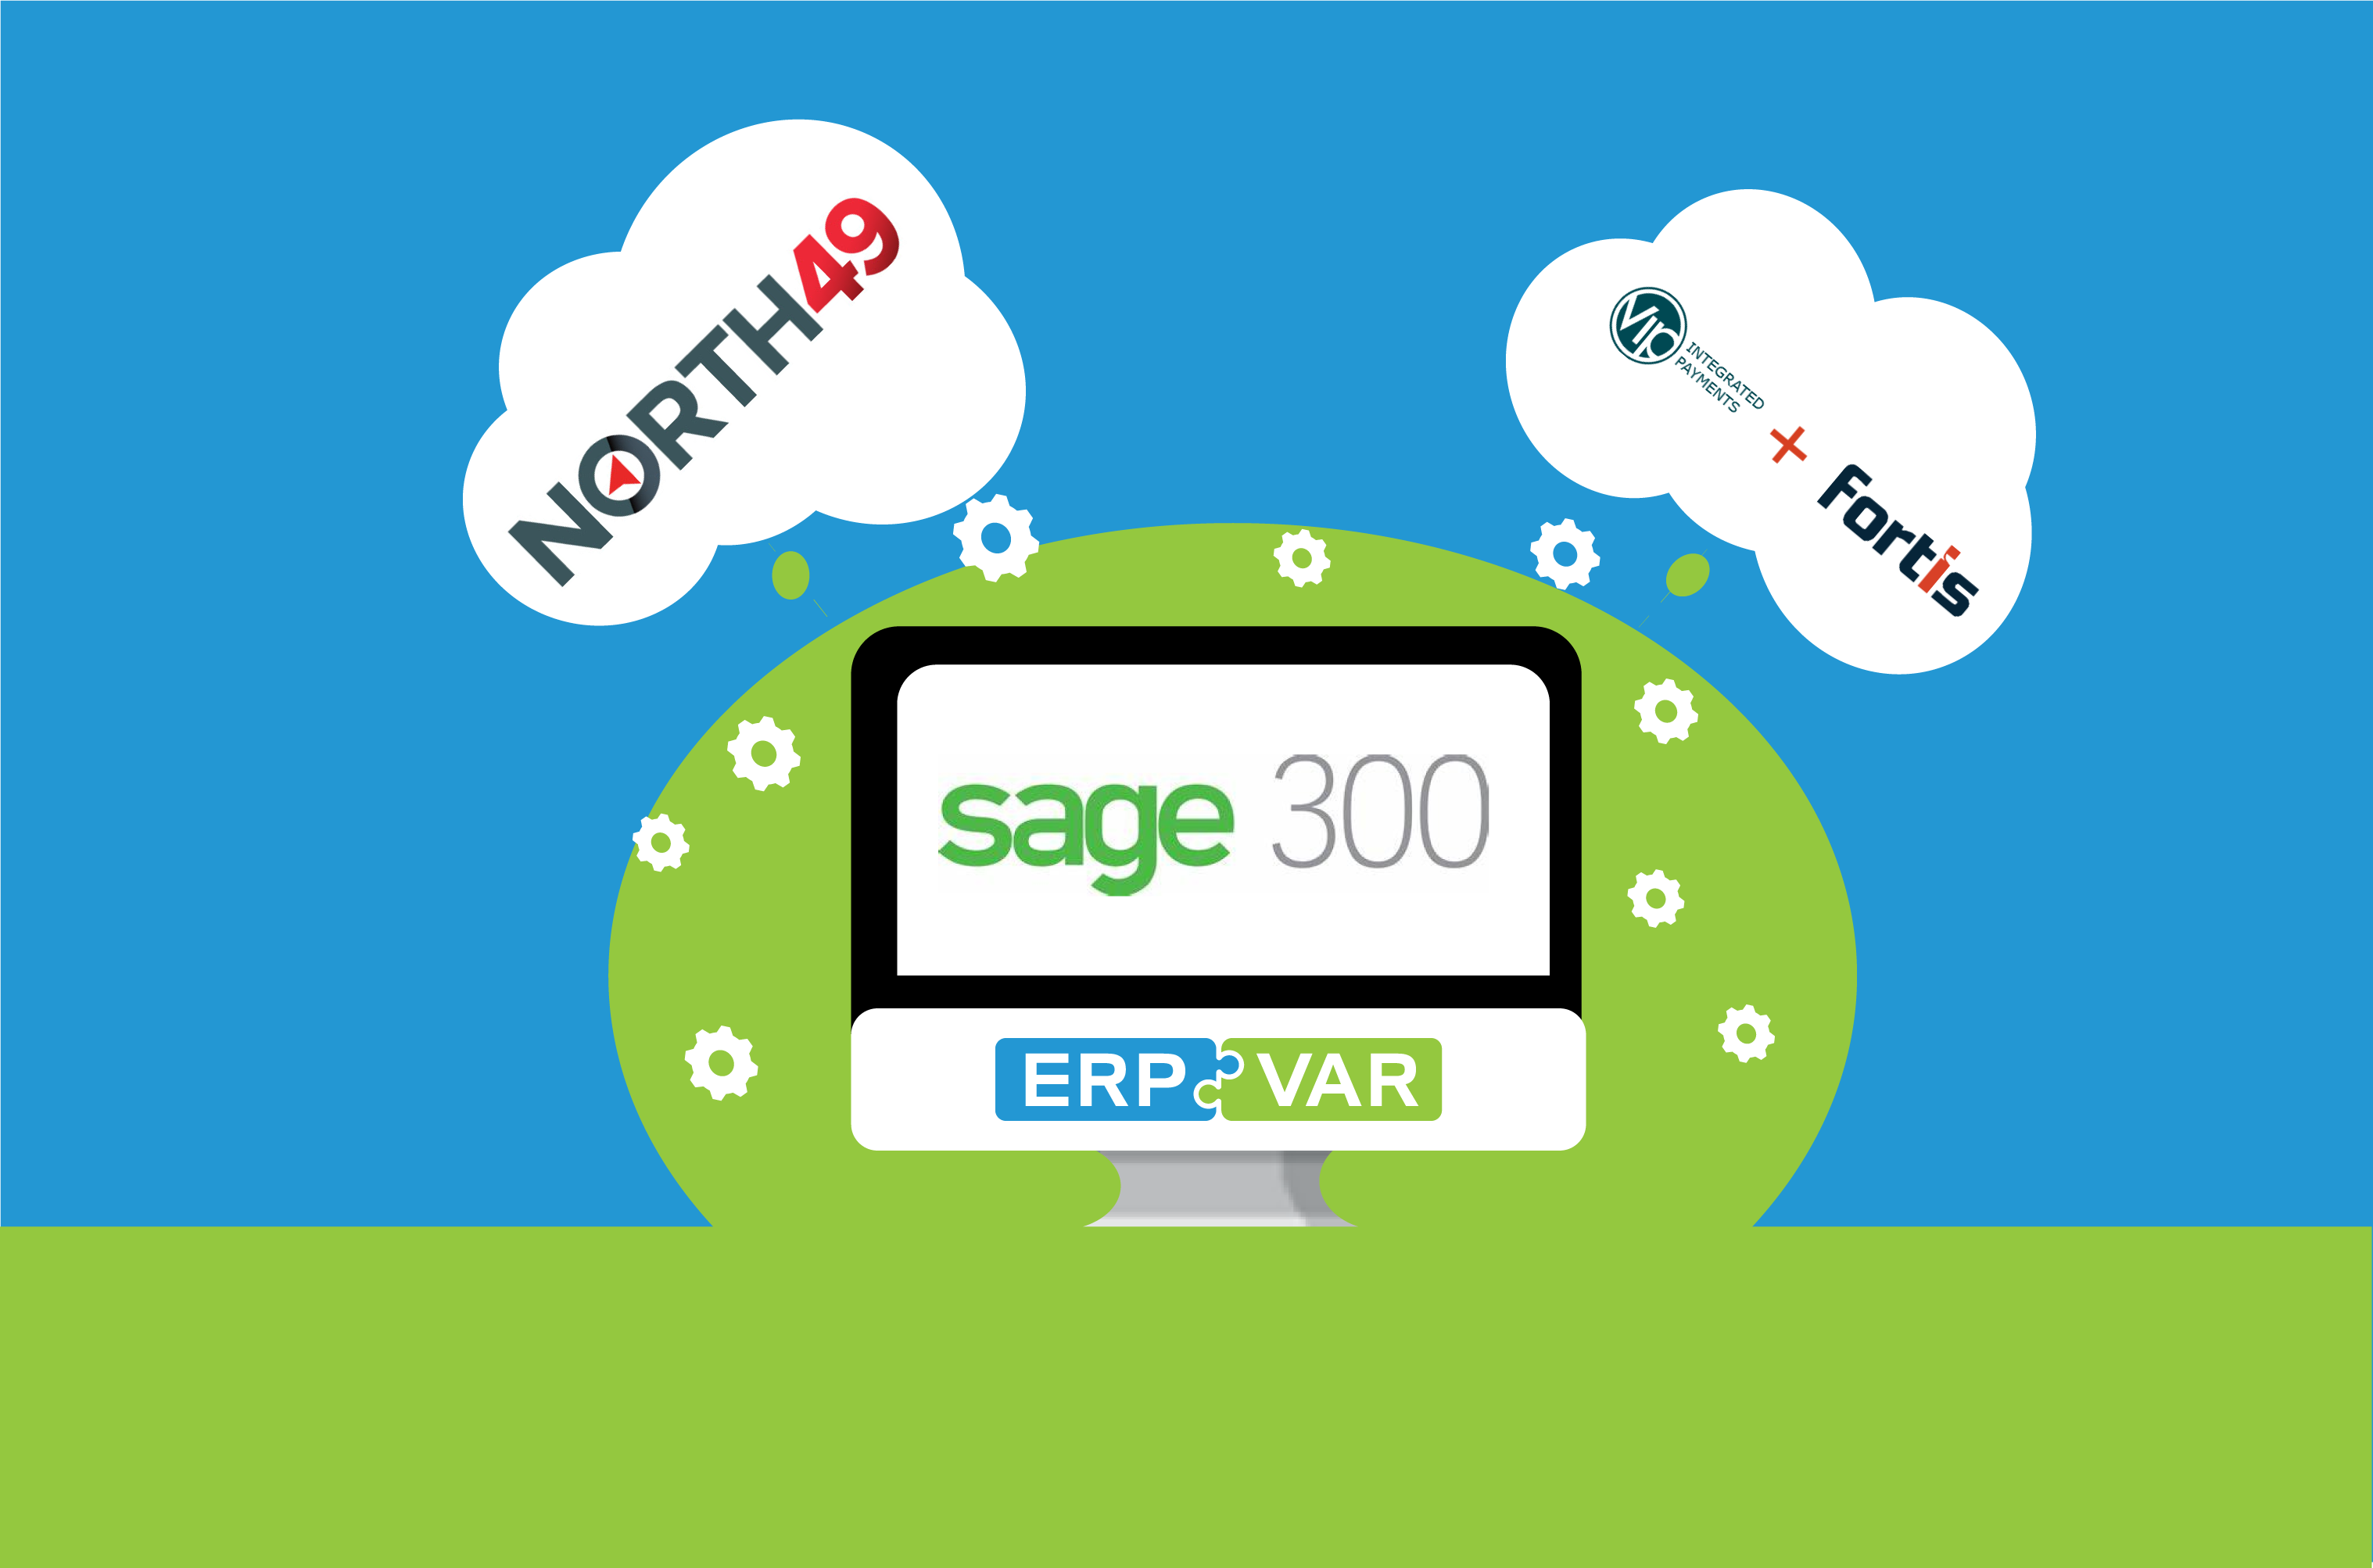 Sage 300: Customer Portal and Payments